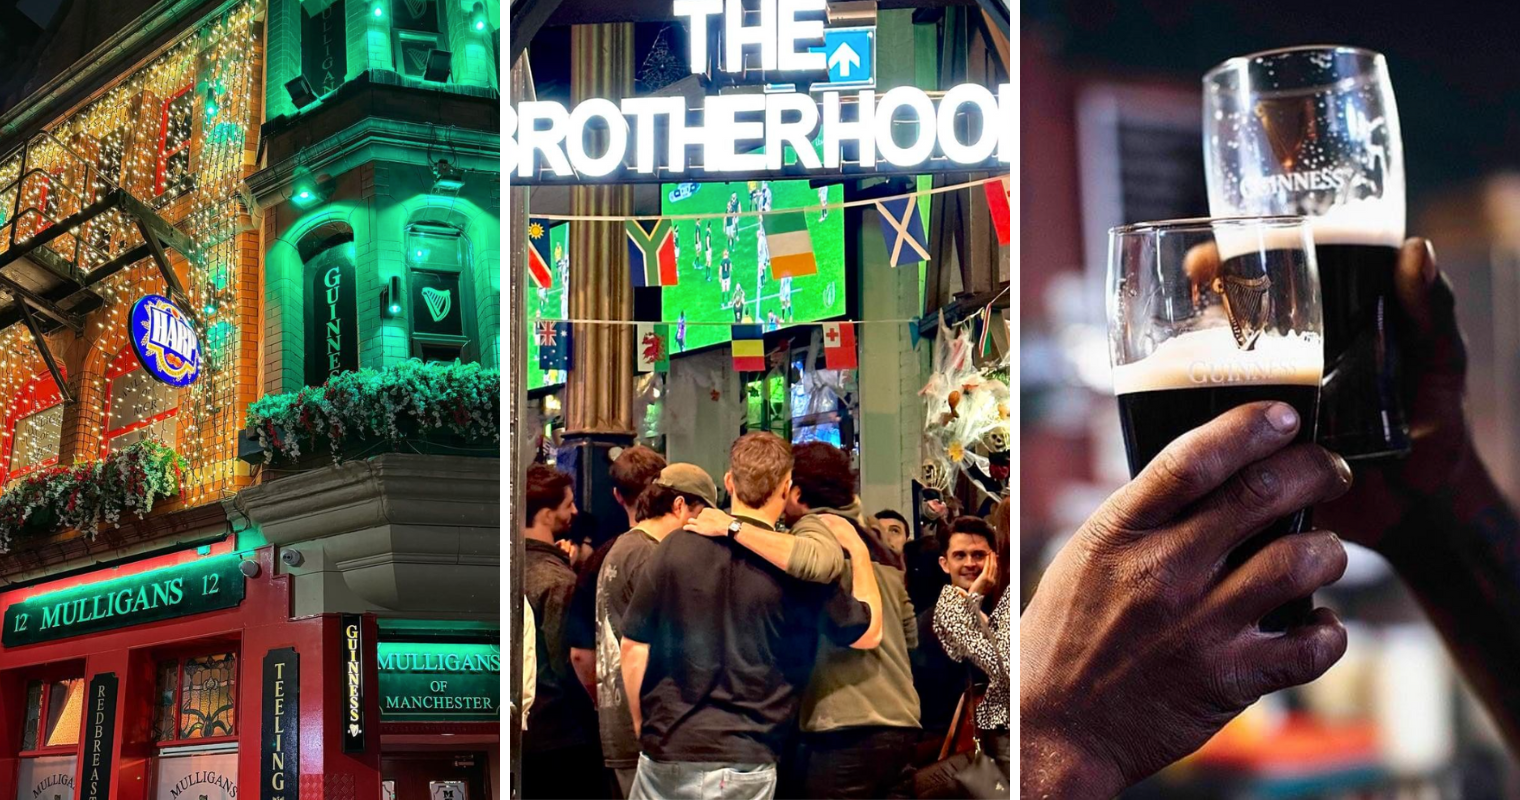 where are the best places to watch the six nations in manchester city centre?